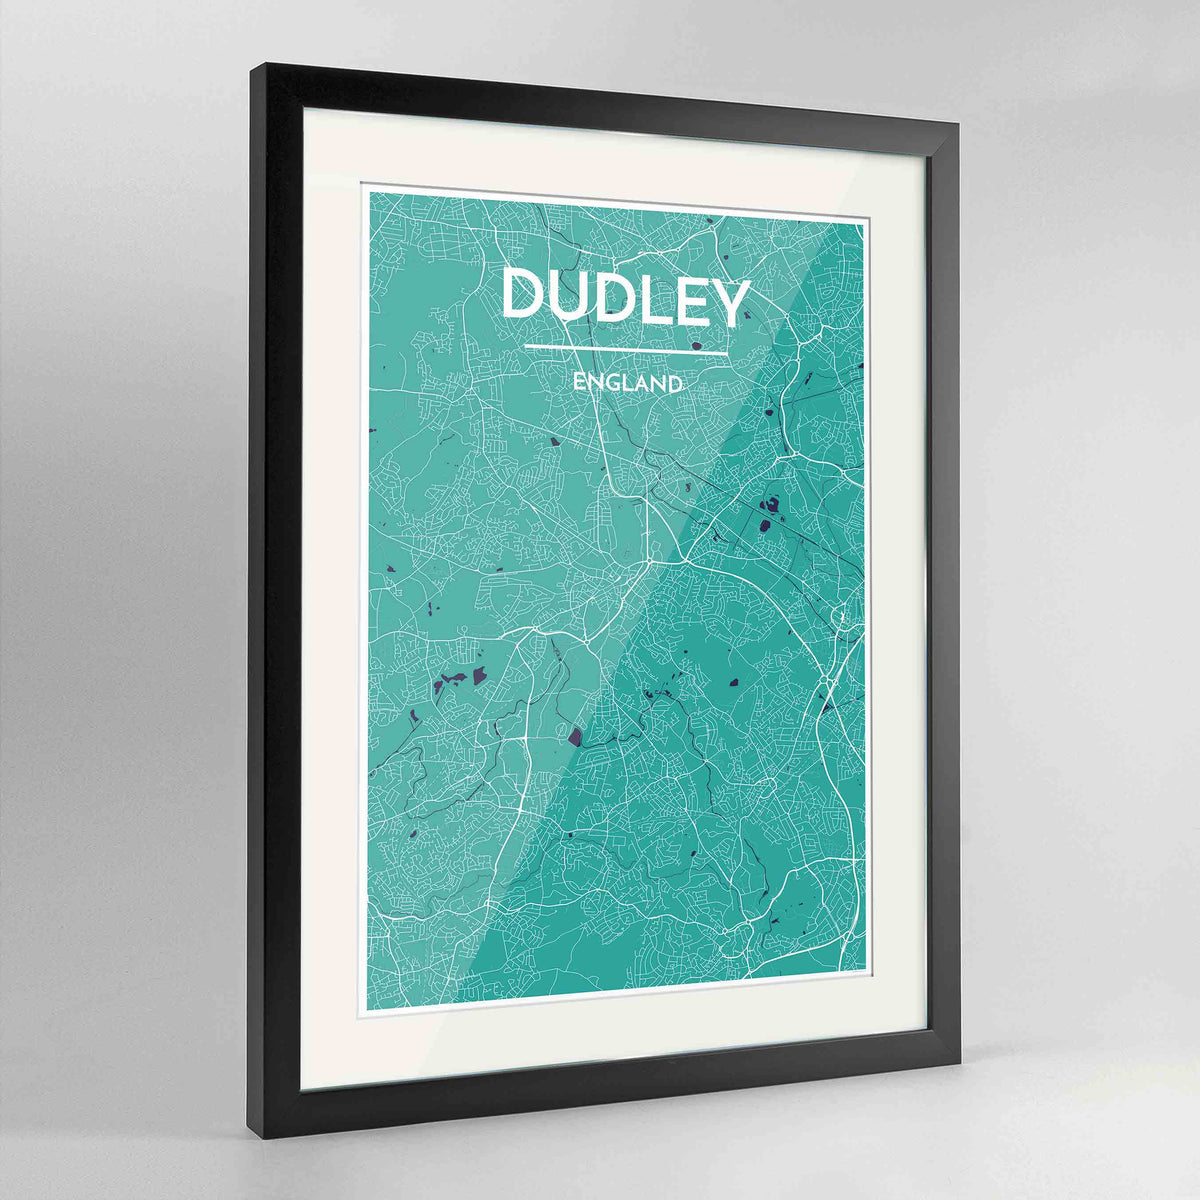 Framed Dudley Map Art Print 24x36&quot; Contemporary Black frame Point Two Design Group